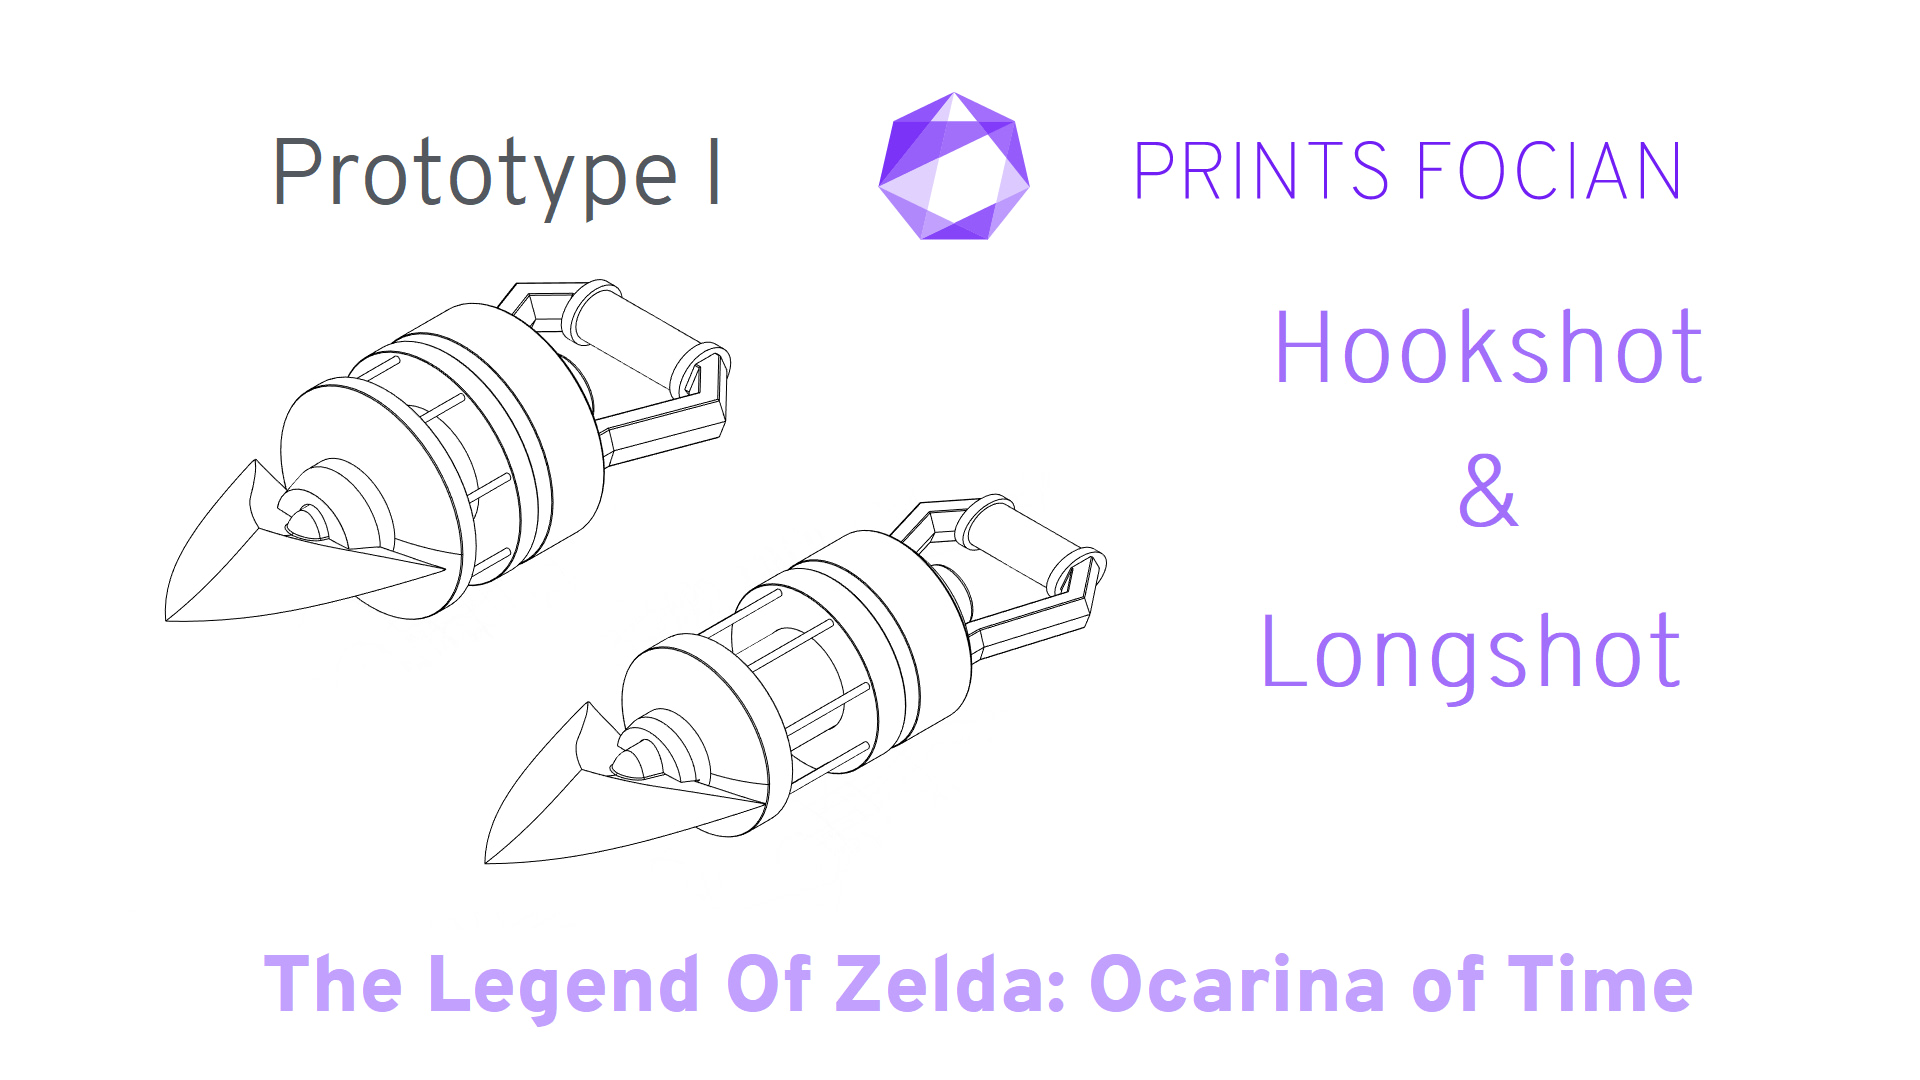 Wireframe image of the Hookshot and Longshot on a white background. Prints Focian Icon top and central. Text: Purple Prints Focian, Hookshot & Longshot, The Legend of Zelda: Ocarina of Time and dark grey Prototype I.